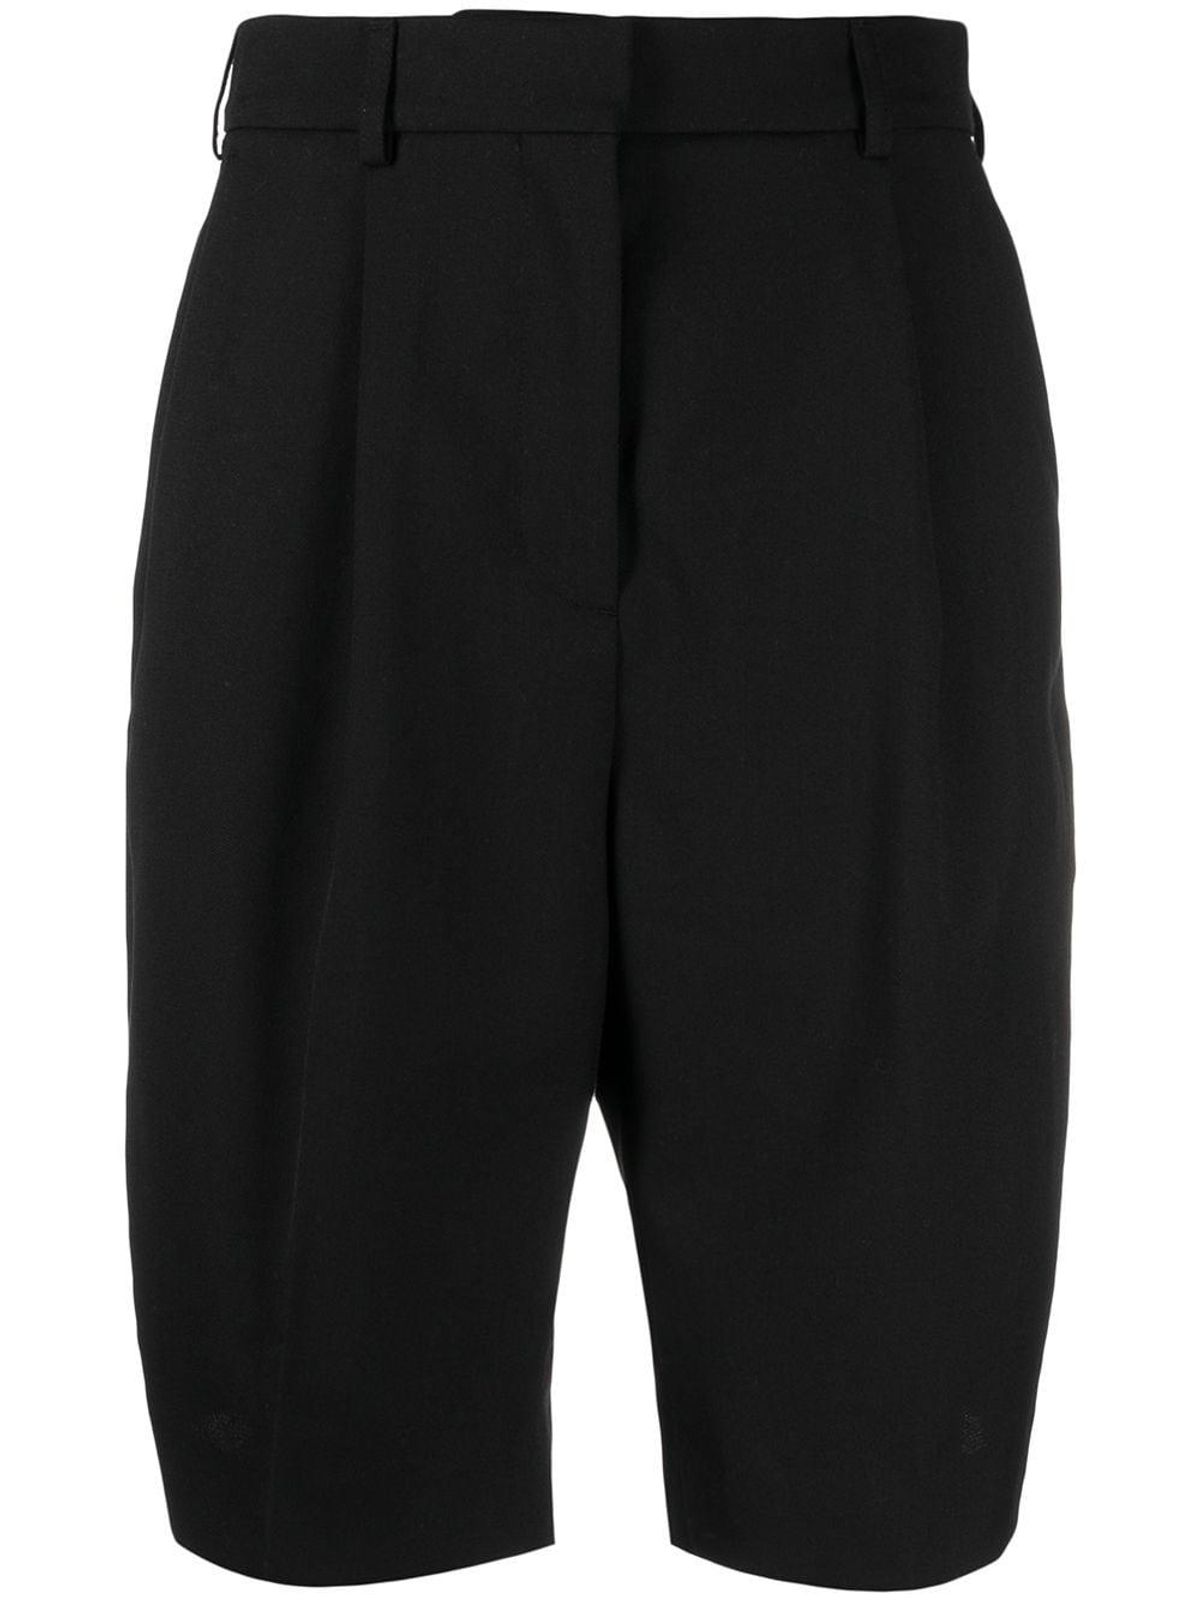 Tailored Knee Length Shorts